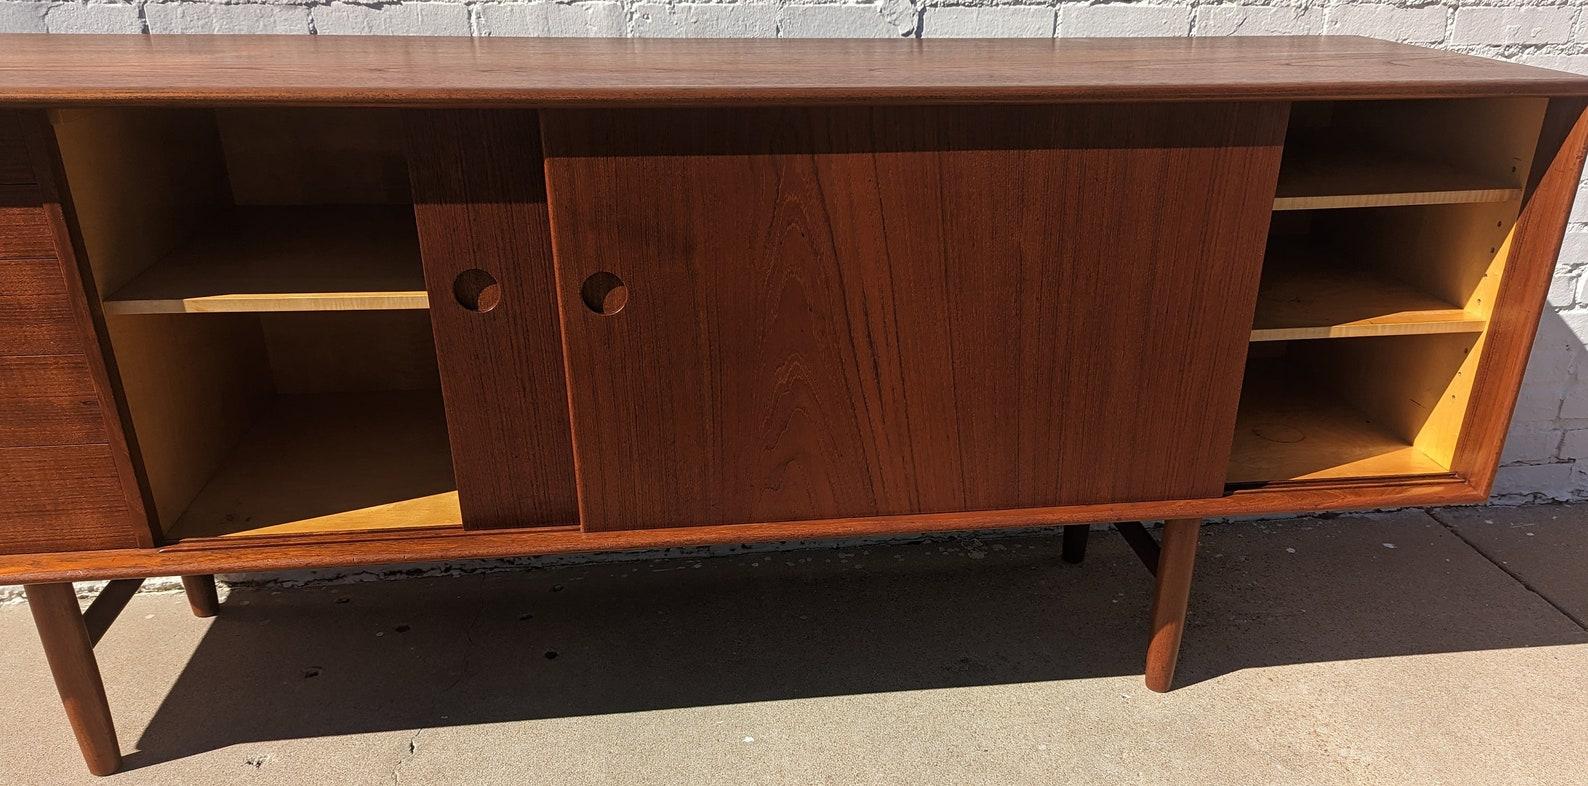 Mid Century Danish Modern Sideboard by Kurt Ostervig for KP Mobler
 
Above average vintage condition and structurally sound. Has some expected slight finish wear and scratching. Has a couple small dings on edges. Top has been refinished. There is a